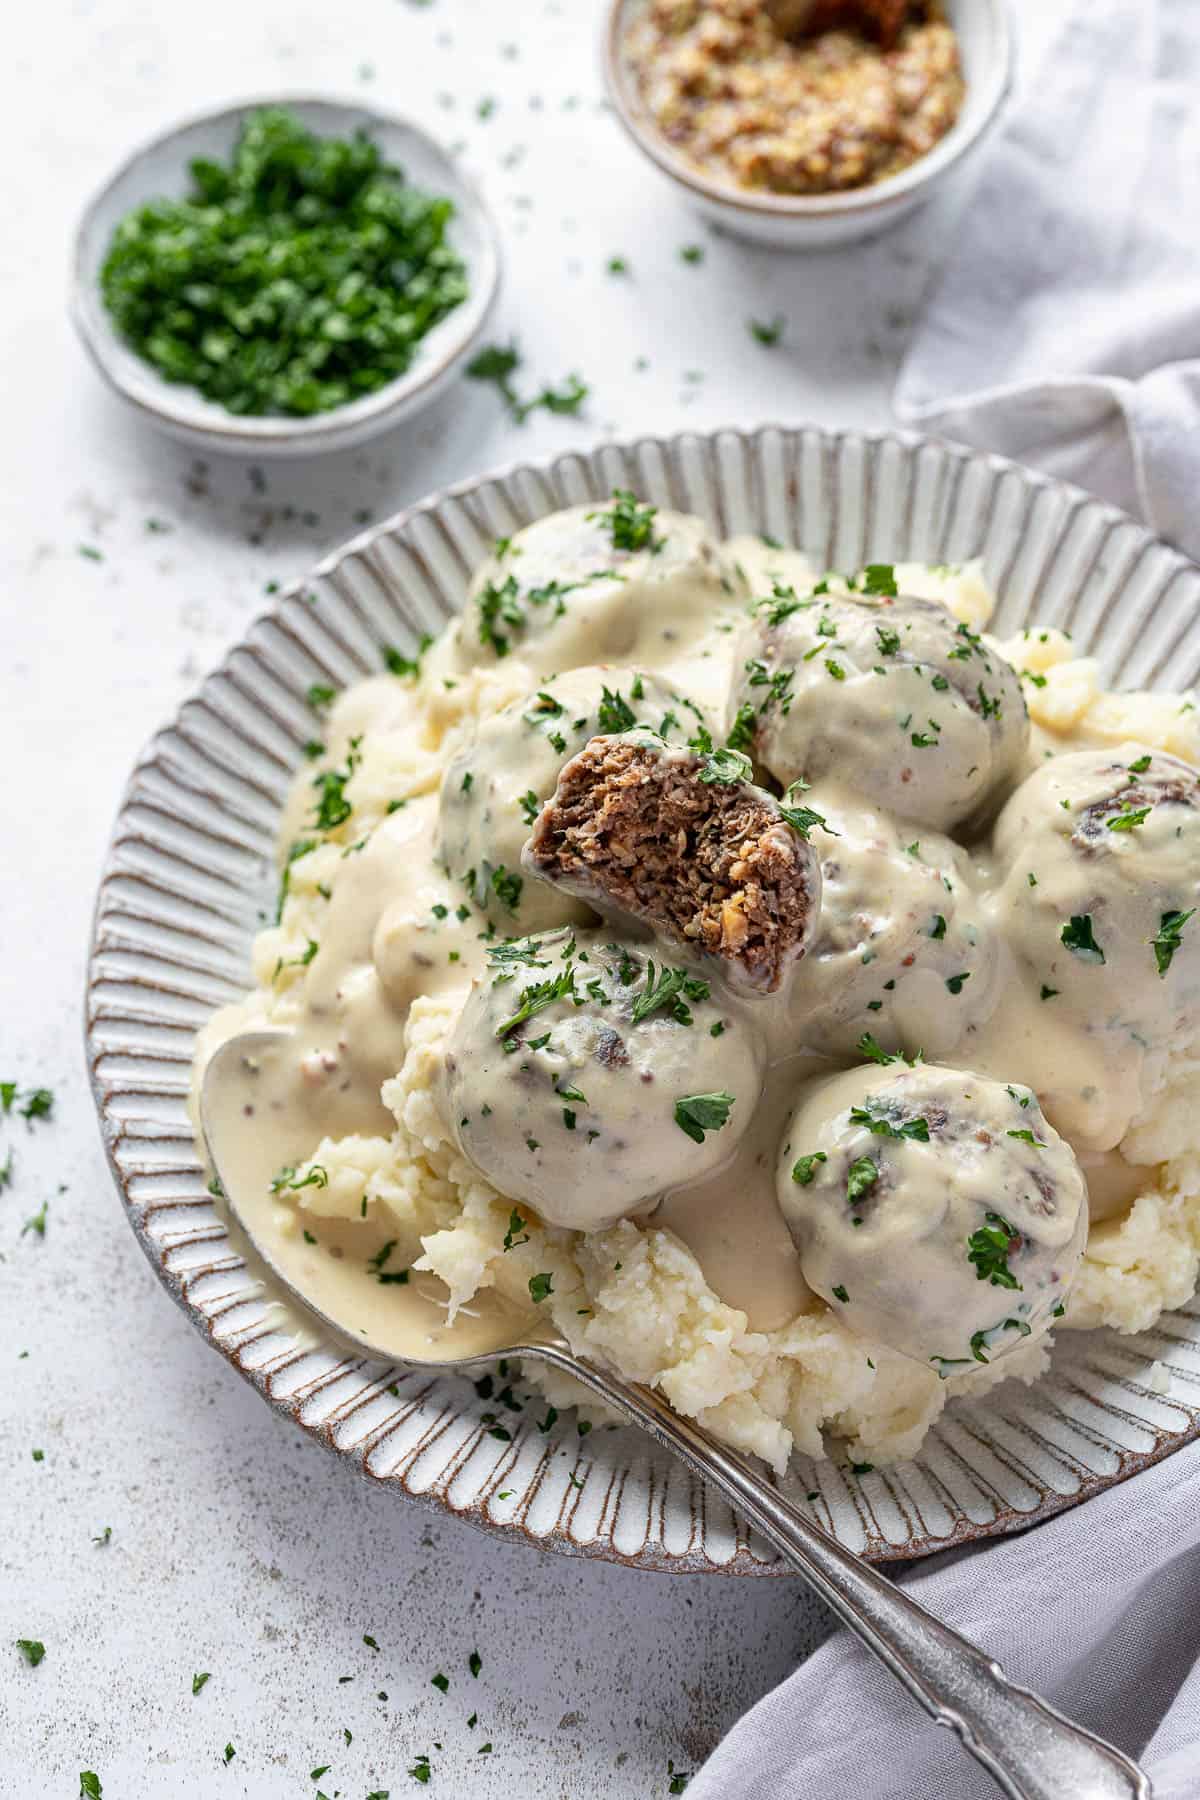 Vegan Swedish meatballs and mashed potato on a white plate with a bowl of parsley and a bowl of mustard.